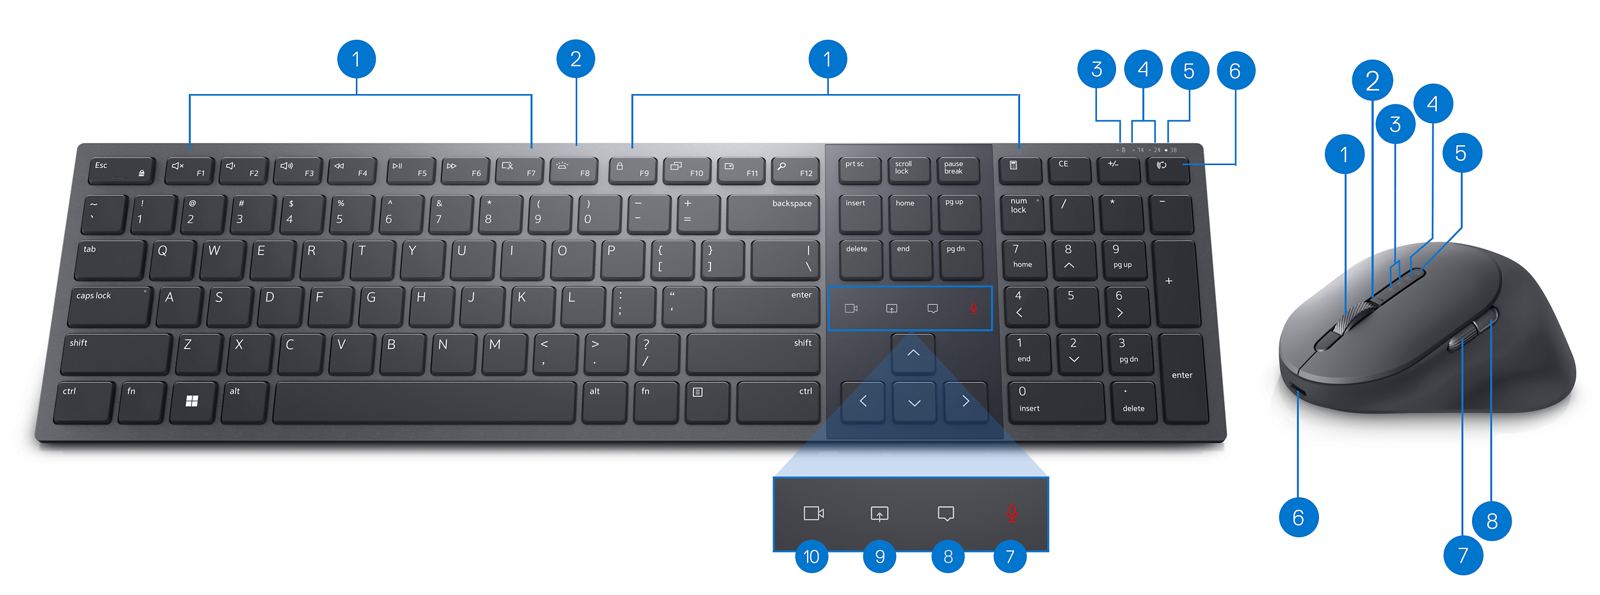 Dell KM900 Premier Collaboration Keyboard and Mouse with numbers from 1 to 10 showing the product features.